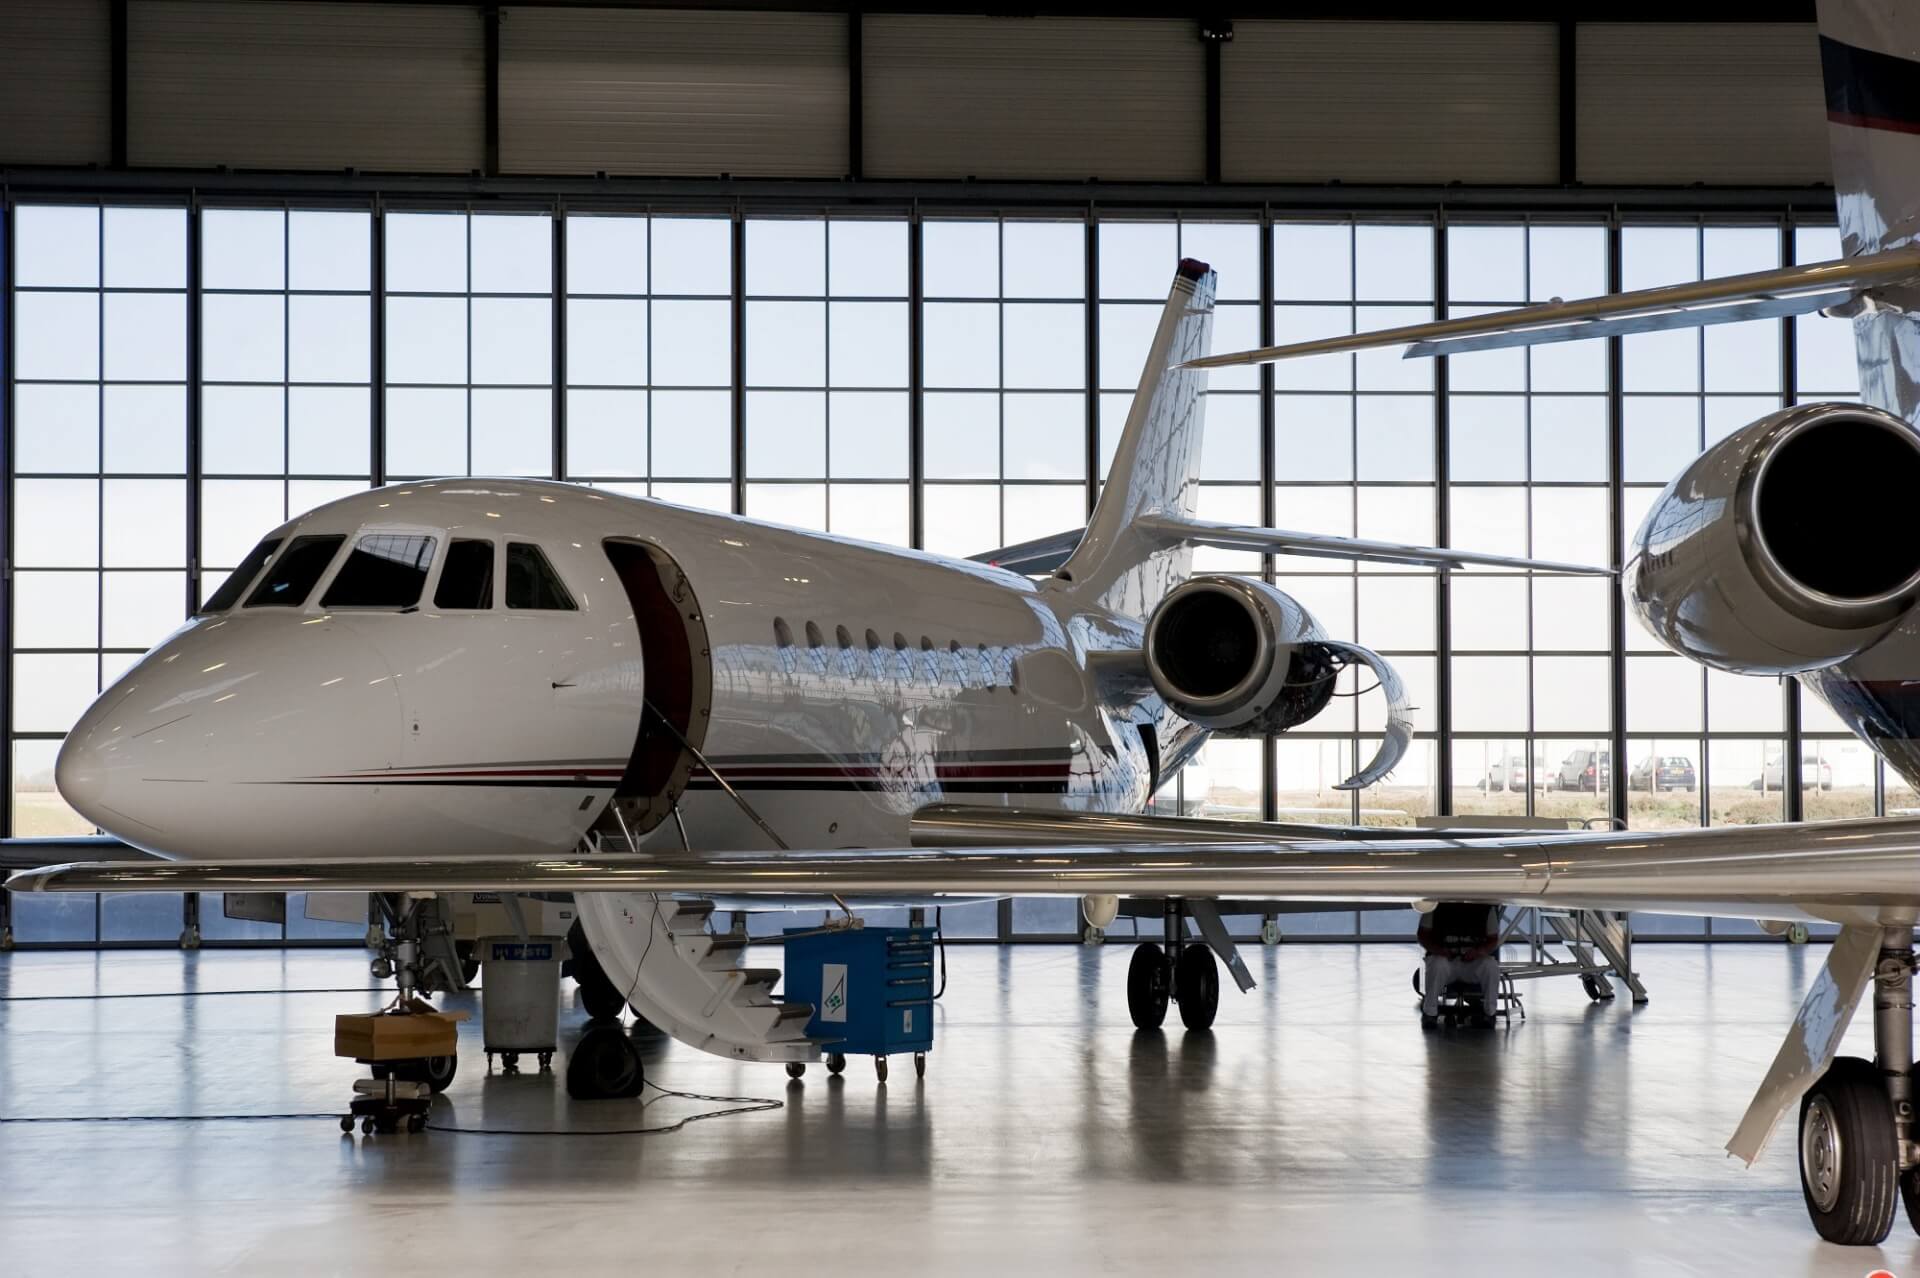 DGCA approves ExecuJet MRO Services Middle East for Falcon 2000